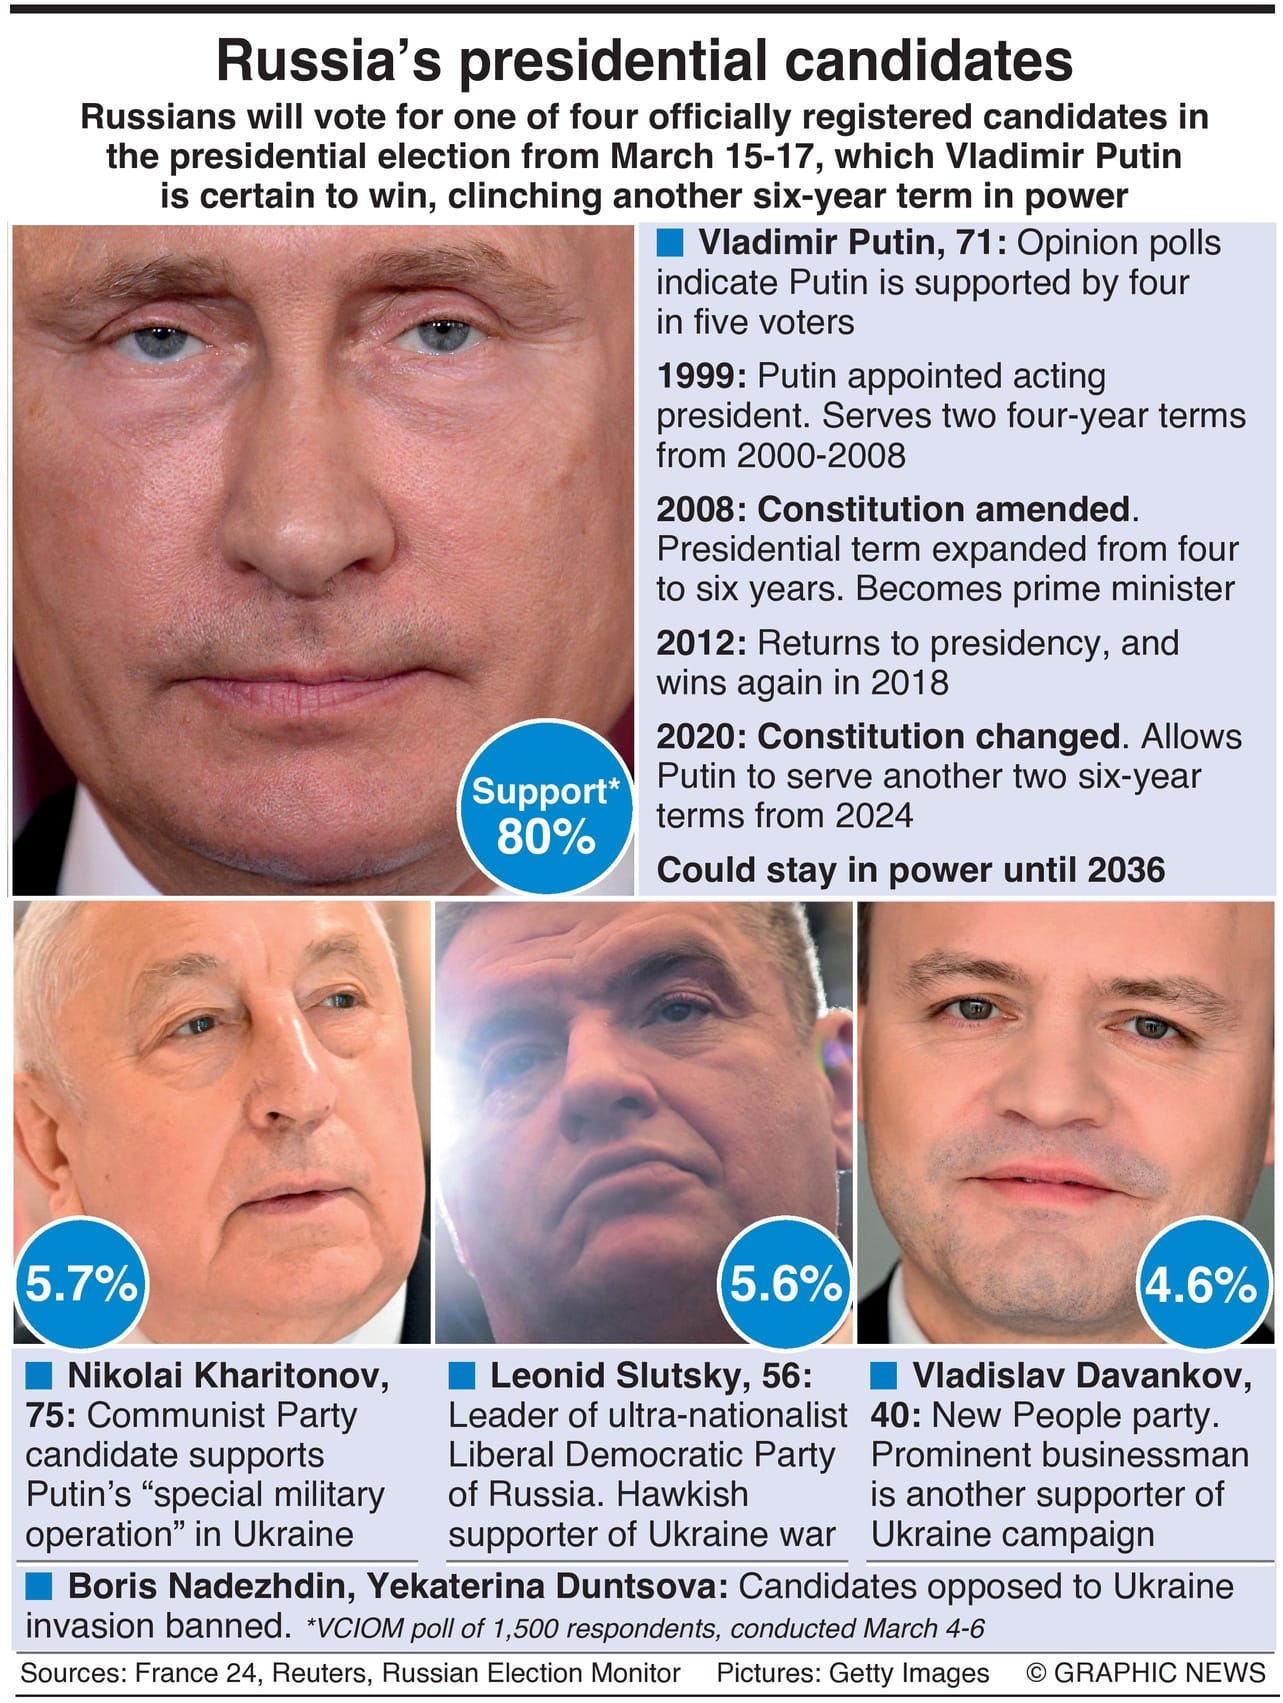 Russia’s Presidential Candidates